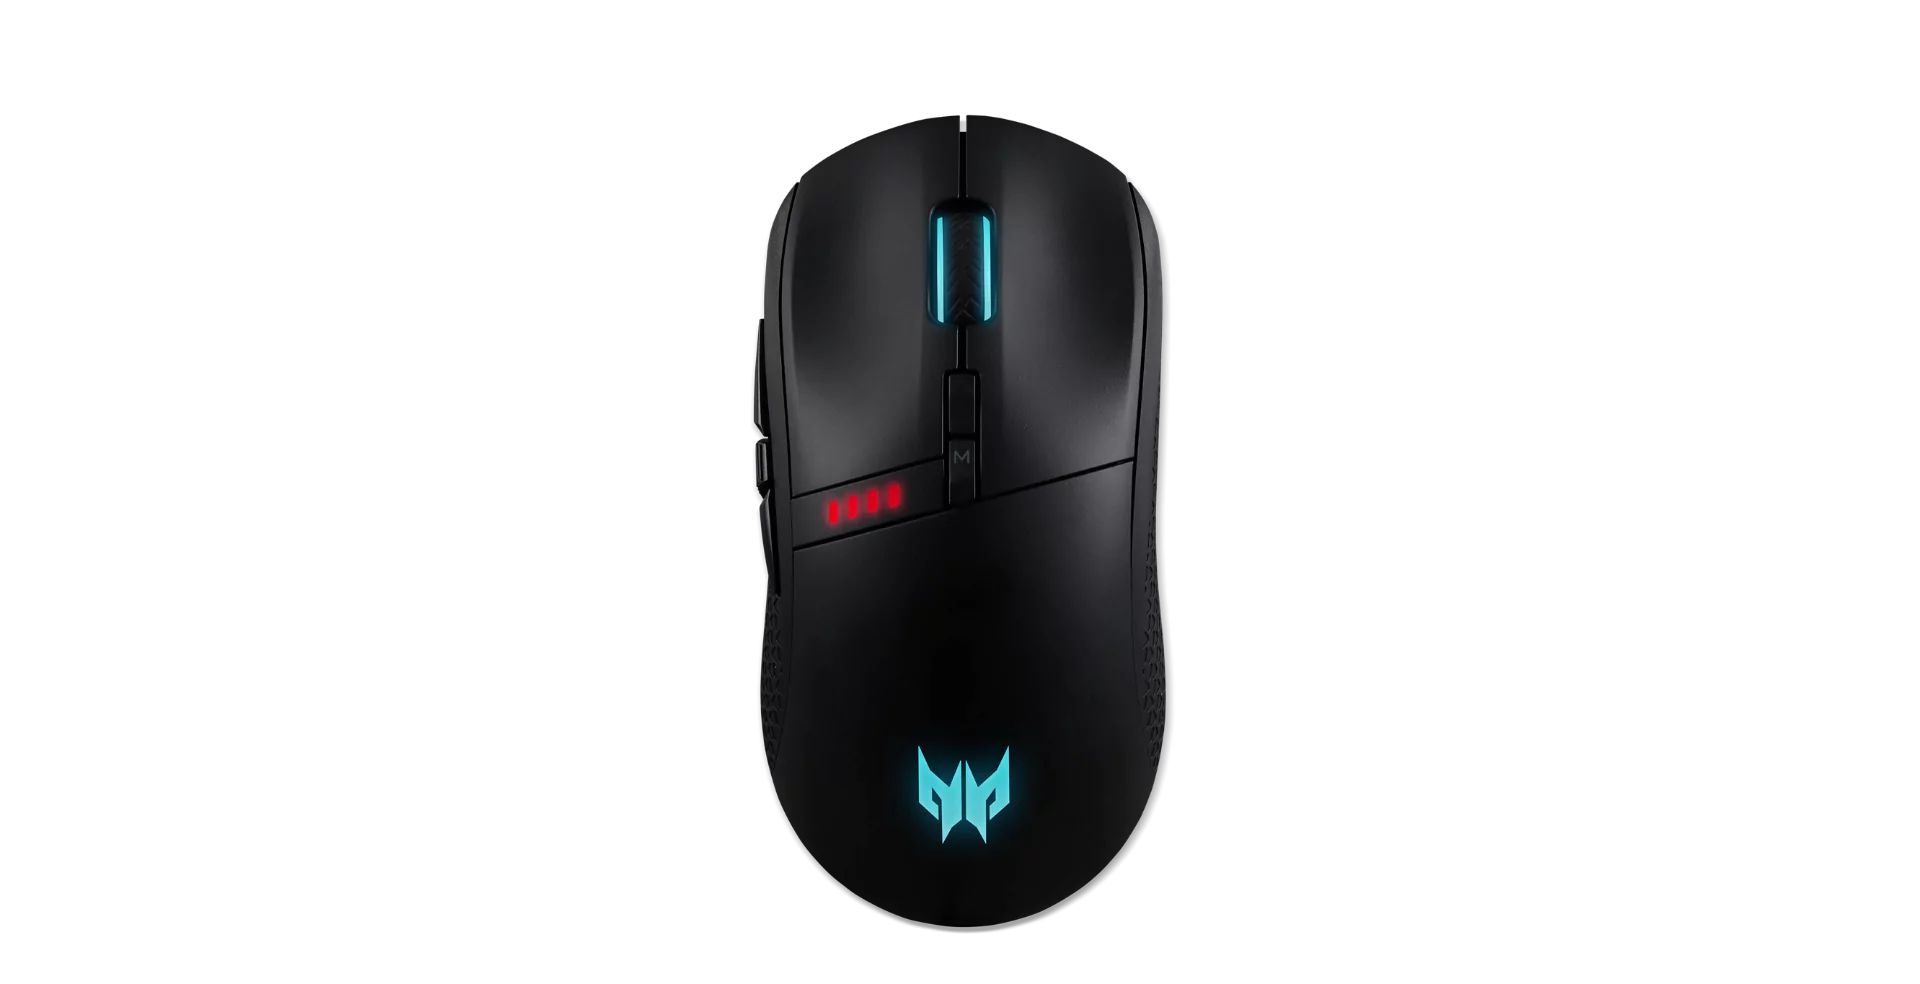 Why Isn’t My Zk-M91 Gaming Mouse Not Lighting